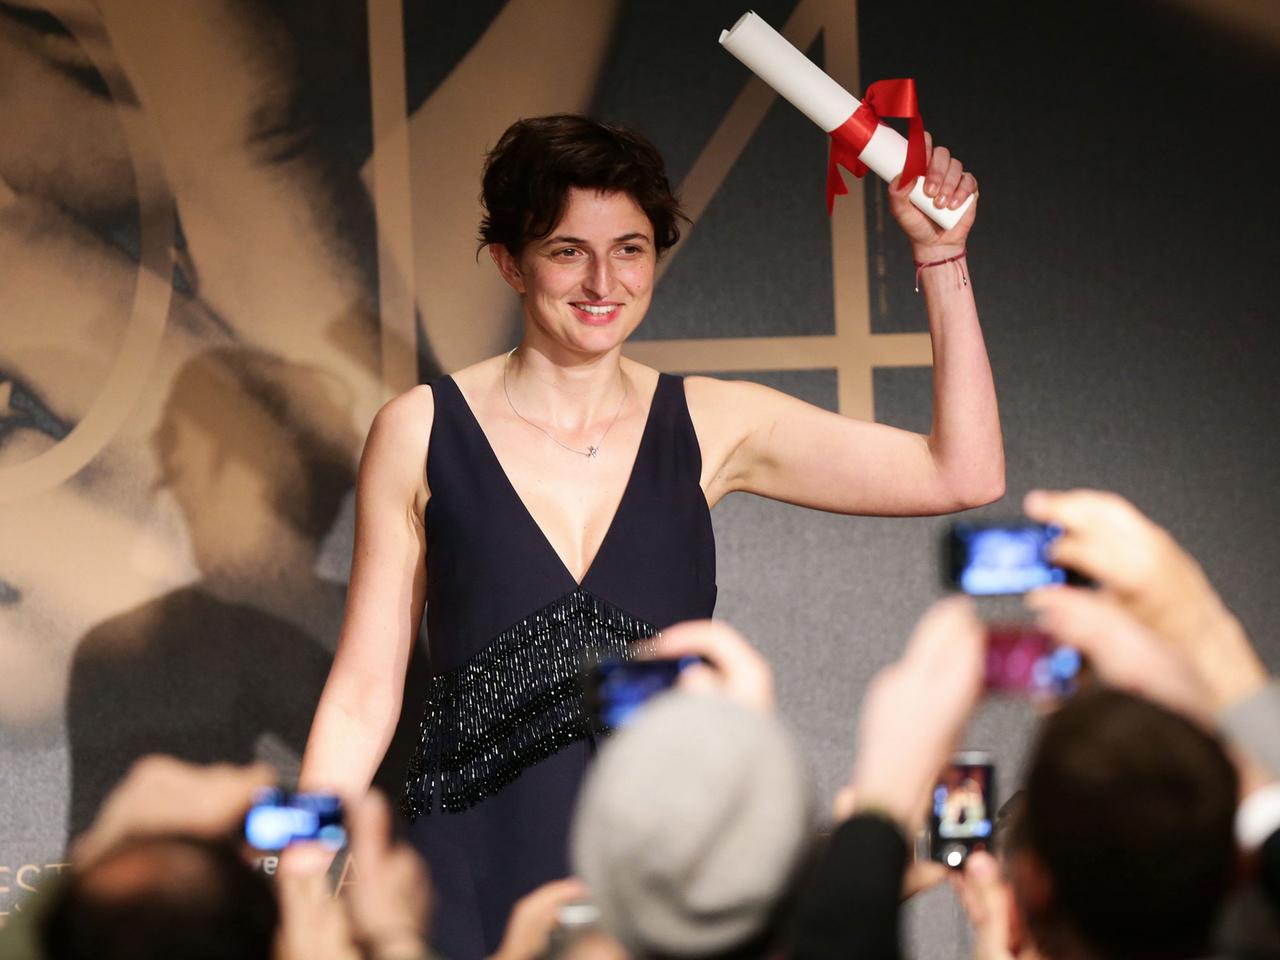 Italian director Alice Rohrwacher attends the Award Winners press conference after she won the Grand Prix award for her movie 'Le Meraviglie' (The Wonders) at the 67th annual Cannes Film Festival in Cannes, France, 24 May 2014